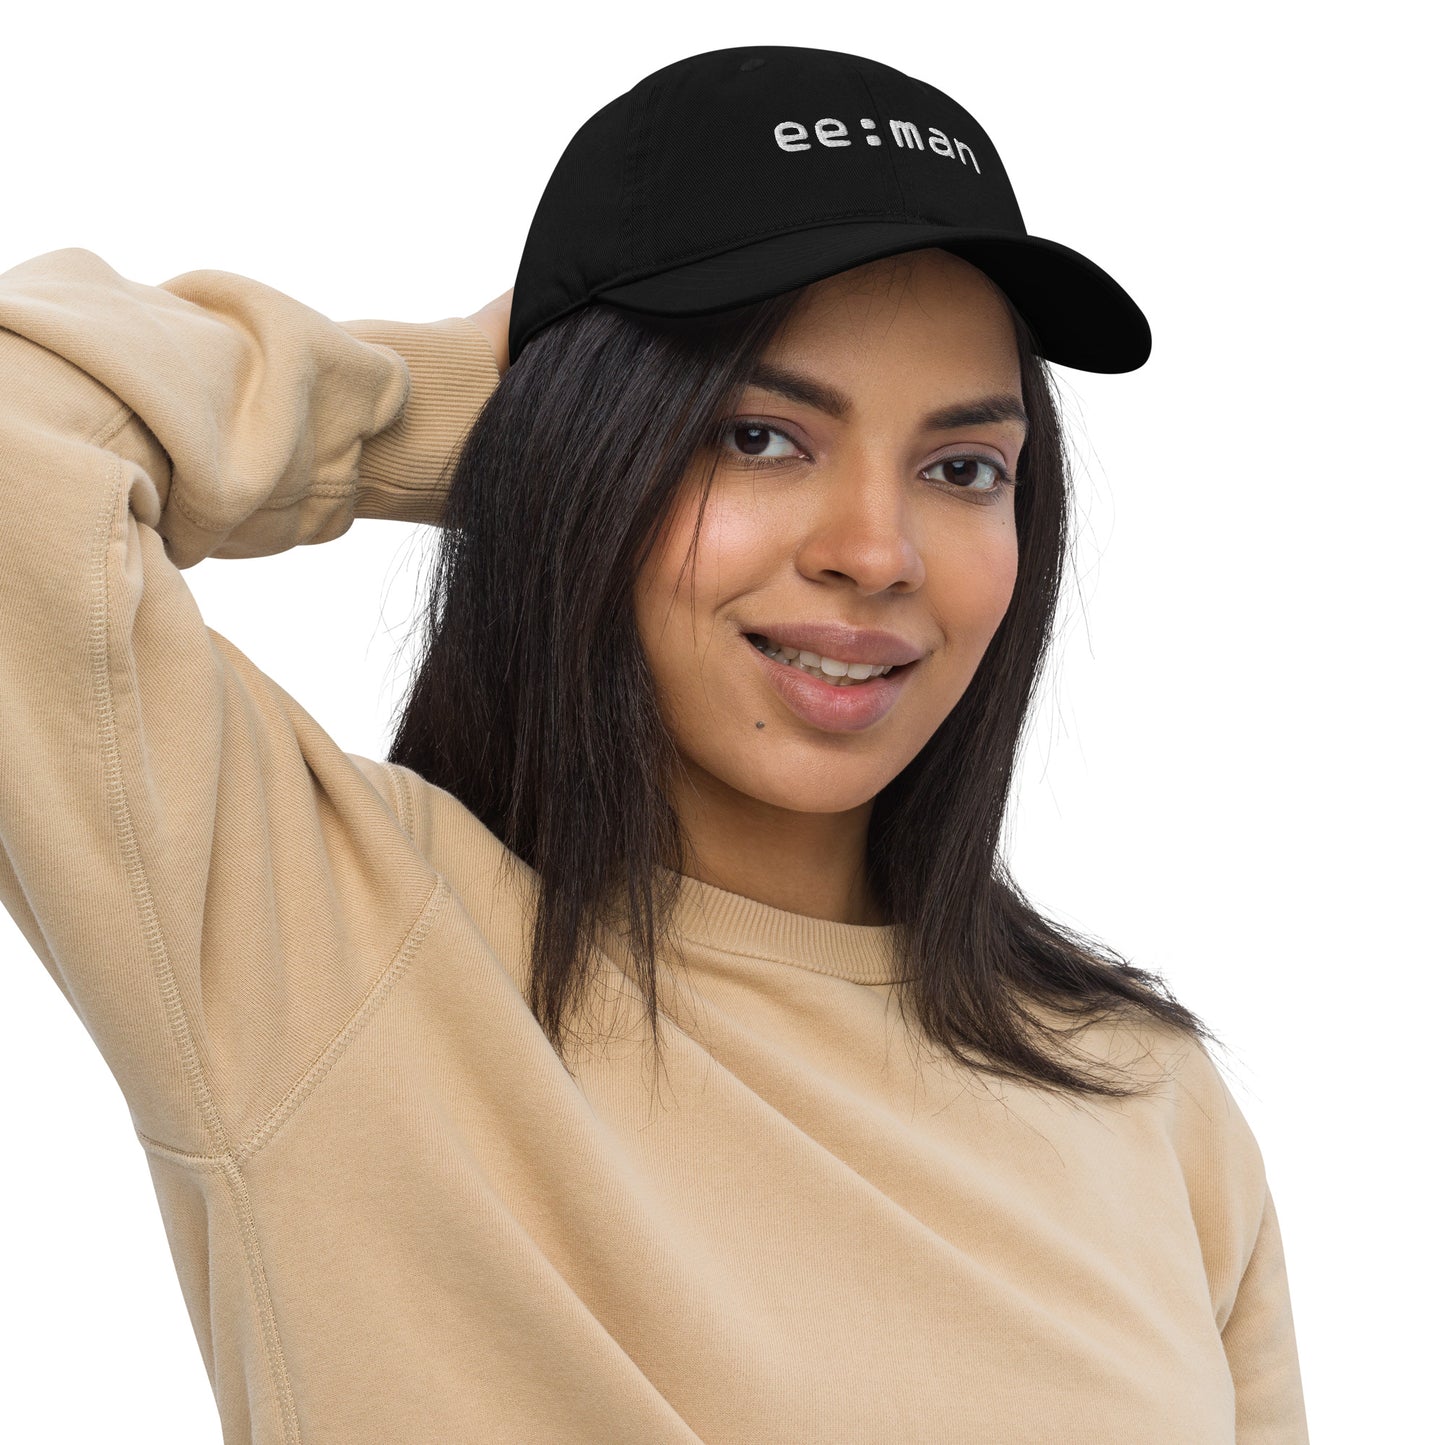 ee:man, official logo (embroidery), Organic dad hat